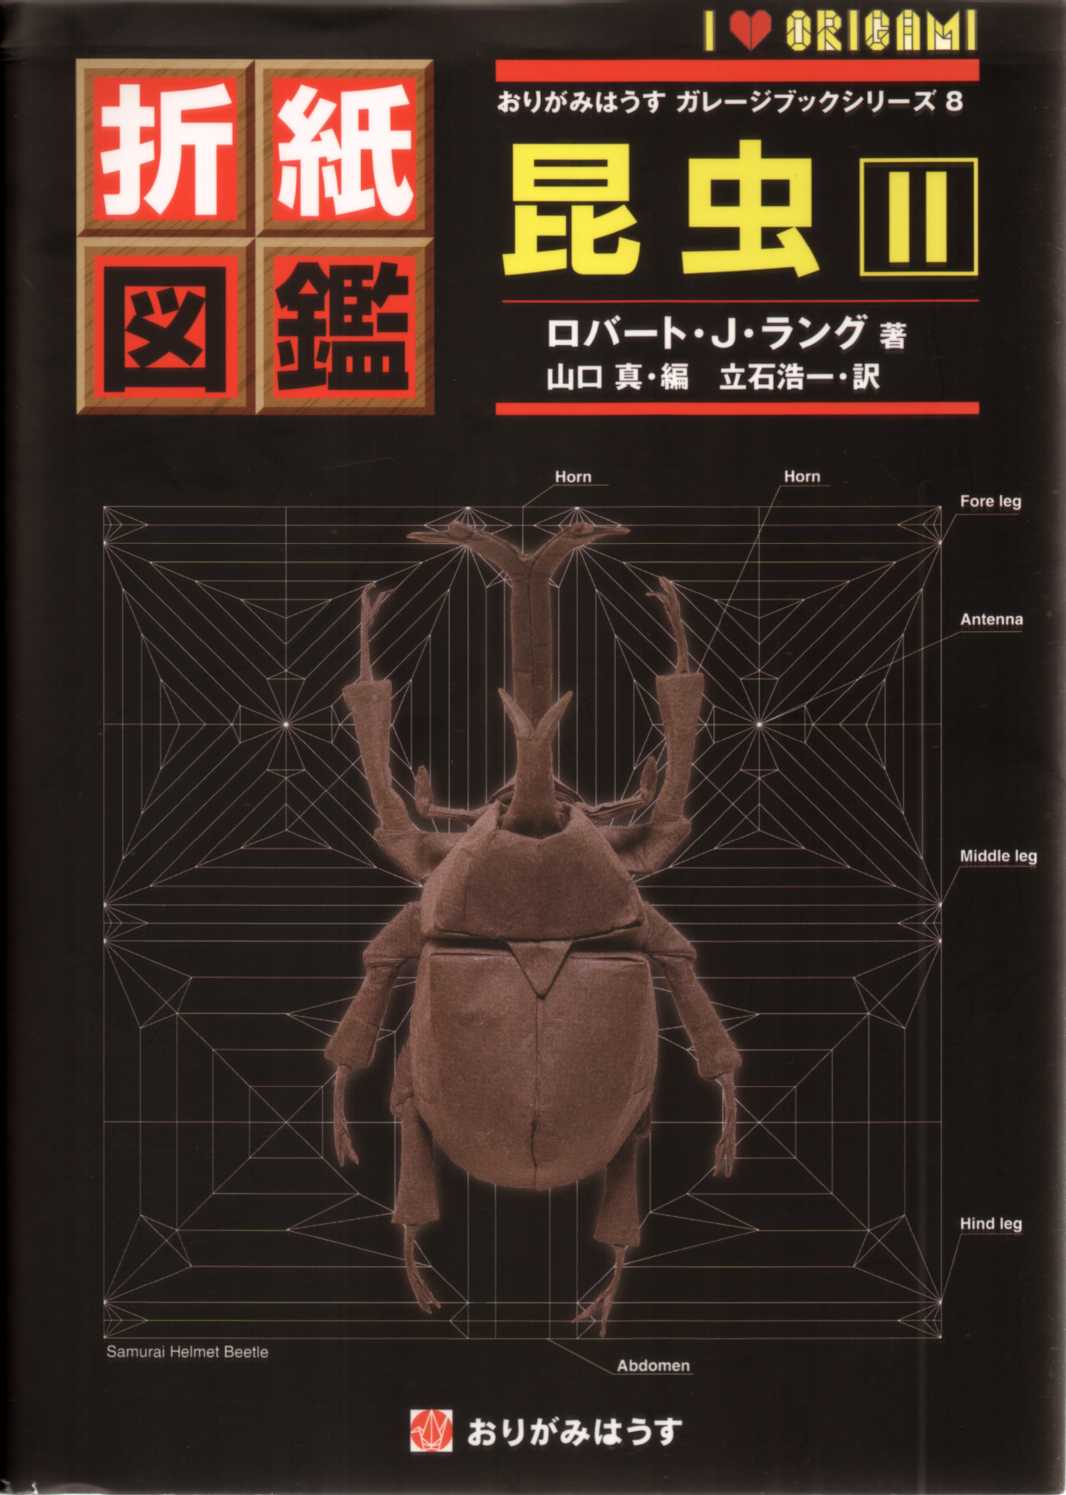 Origami Insects II / 折紙図鑑　昆虫・2 : page 24.